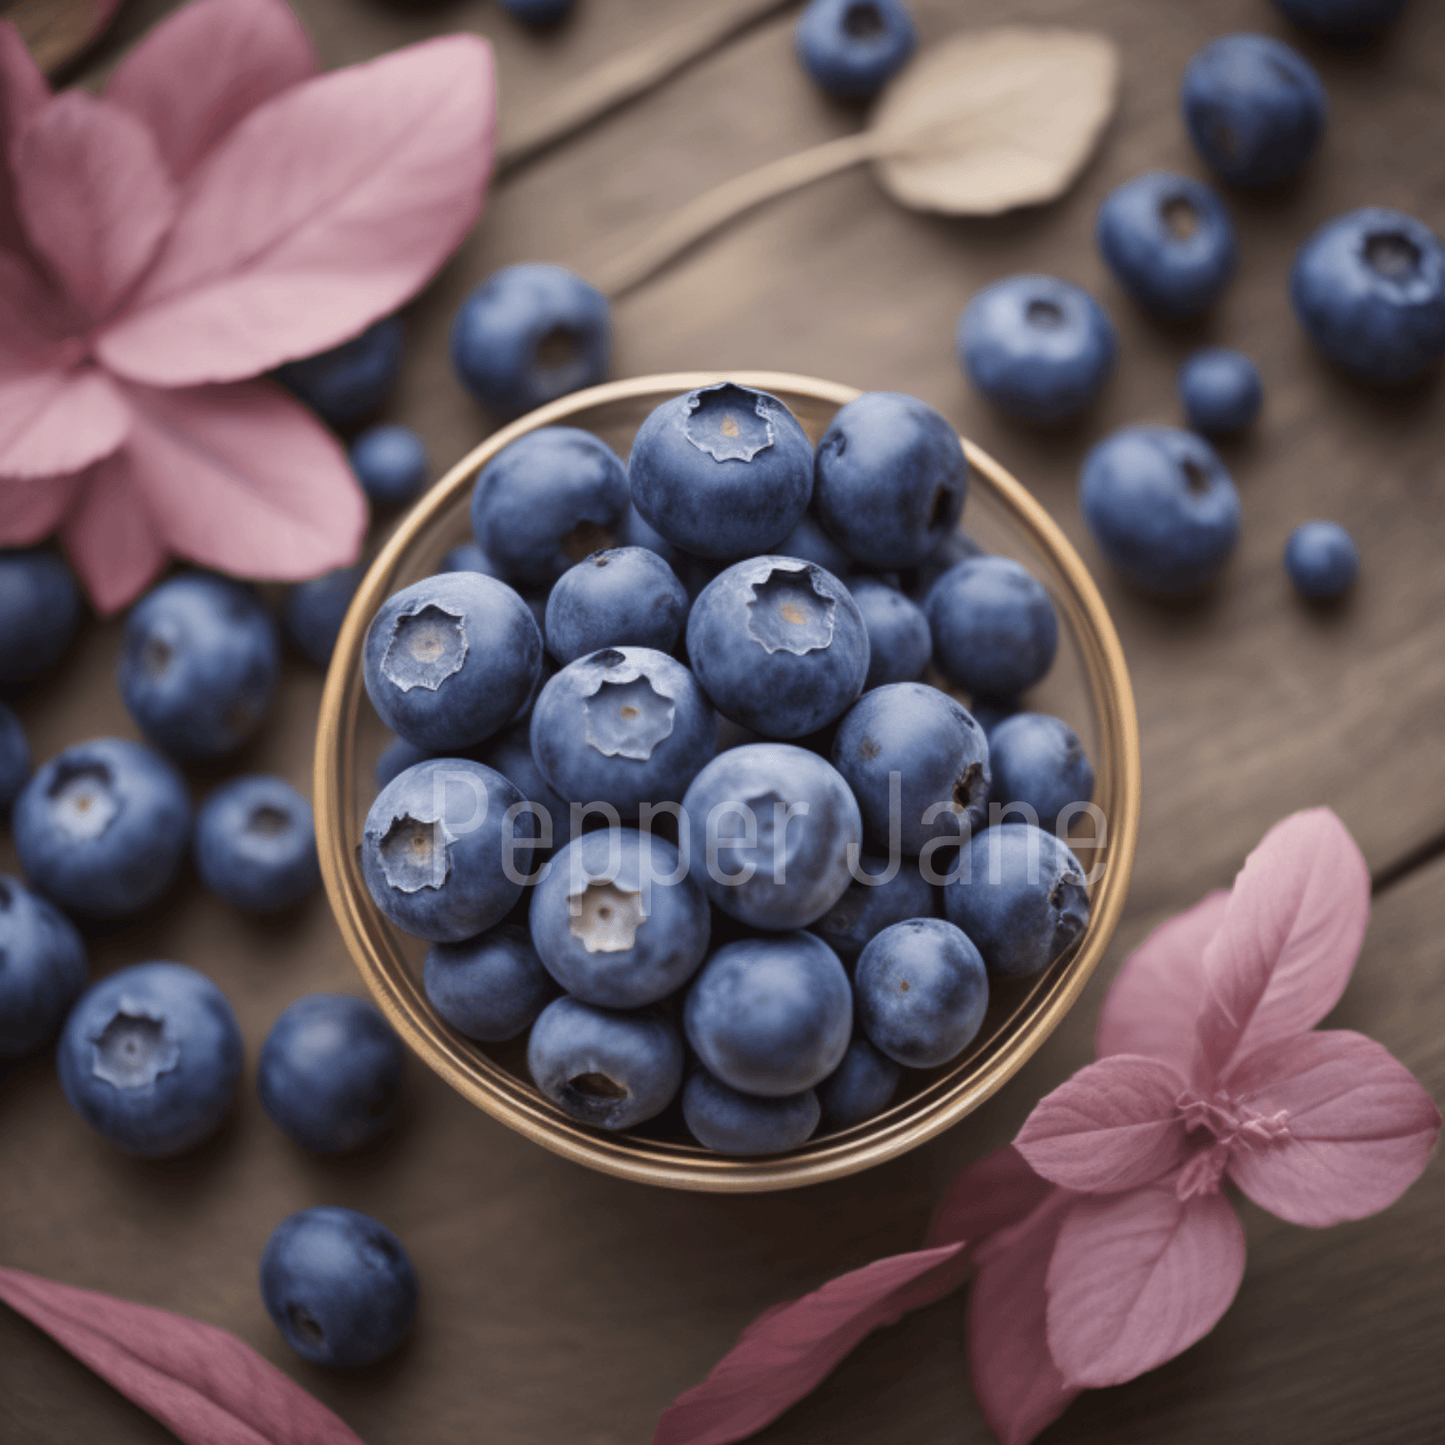 Blueberry Fragrance Oil - Pepper Jane's Colors and Scents